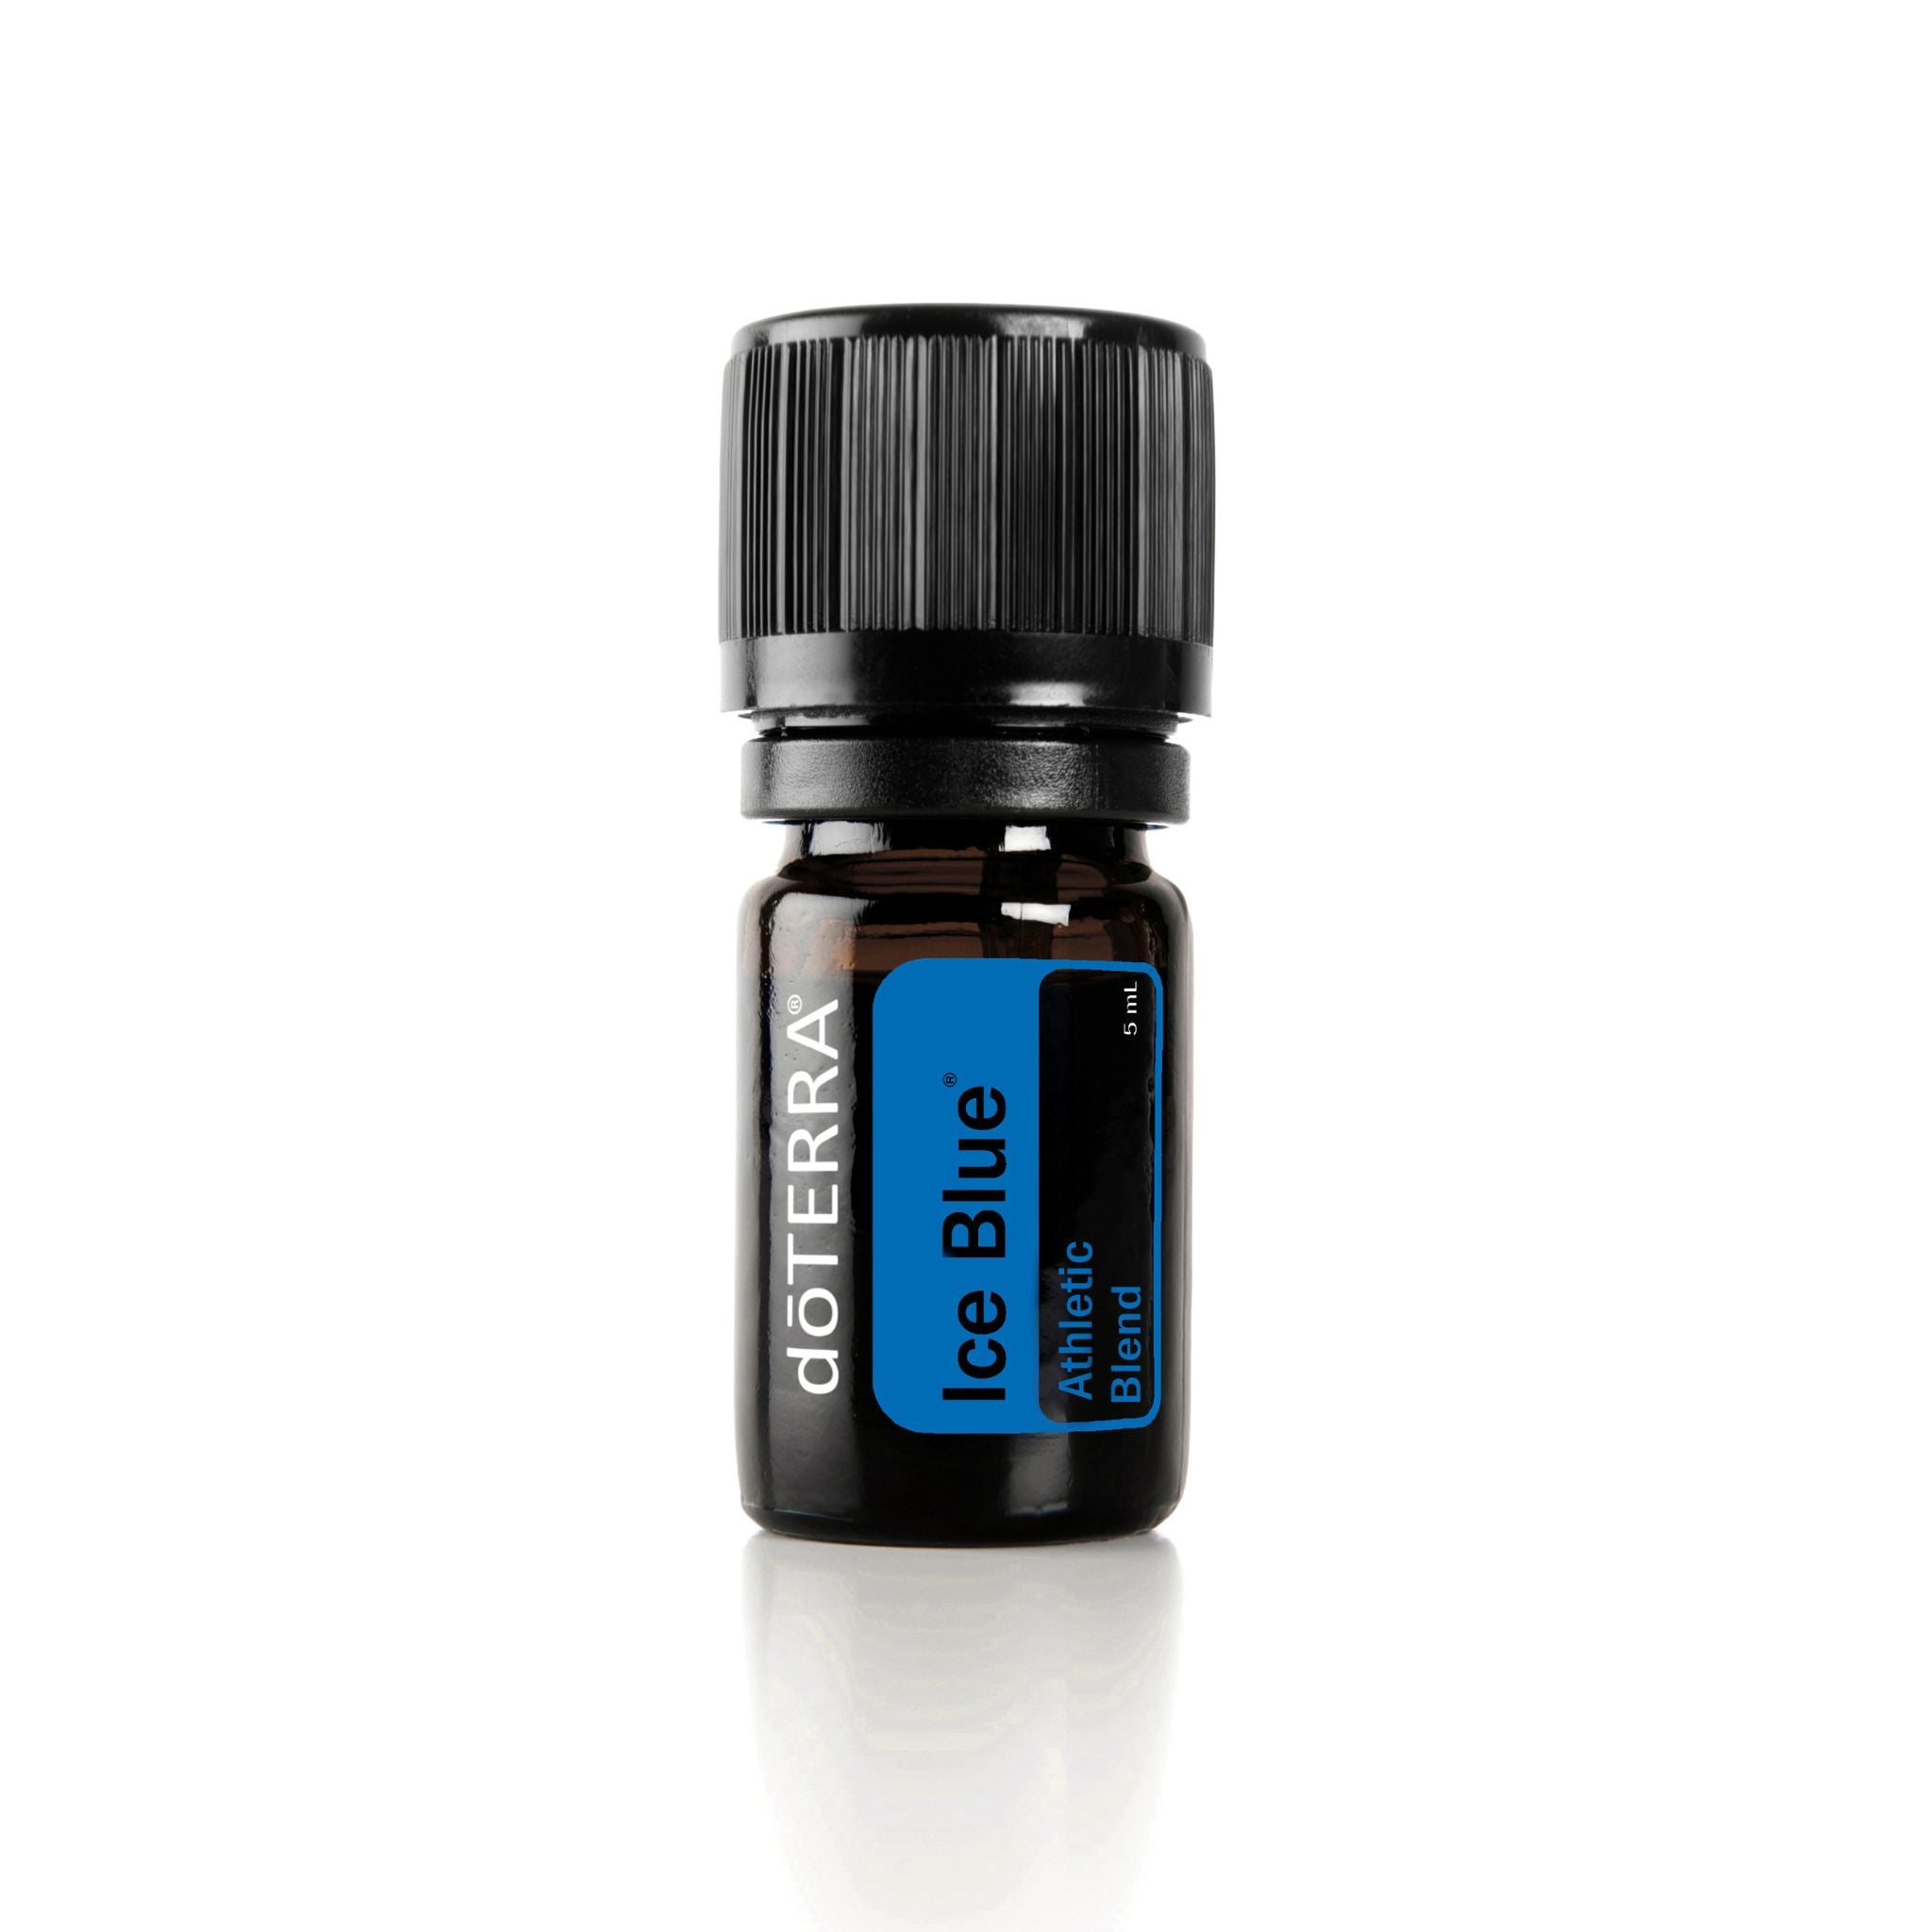 Ice Blue Essential Oil for soothing massage. Glass bottle, blue label, 5 ml